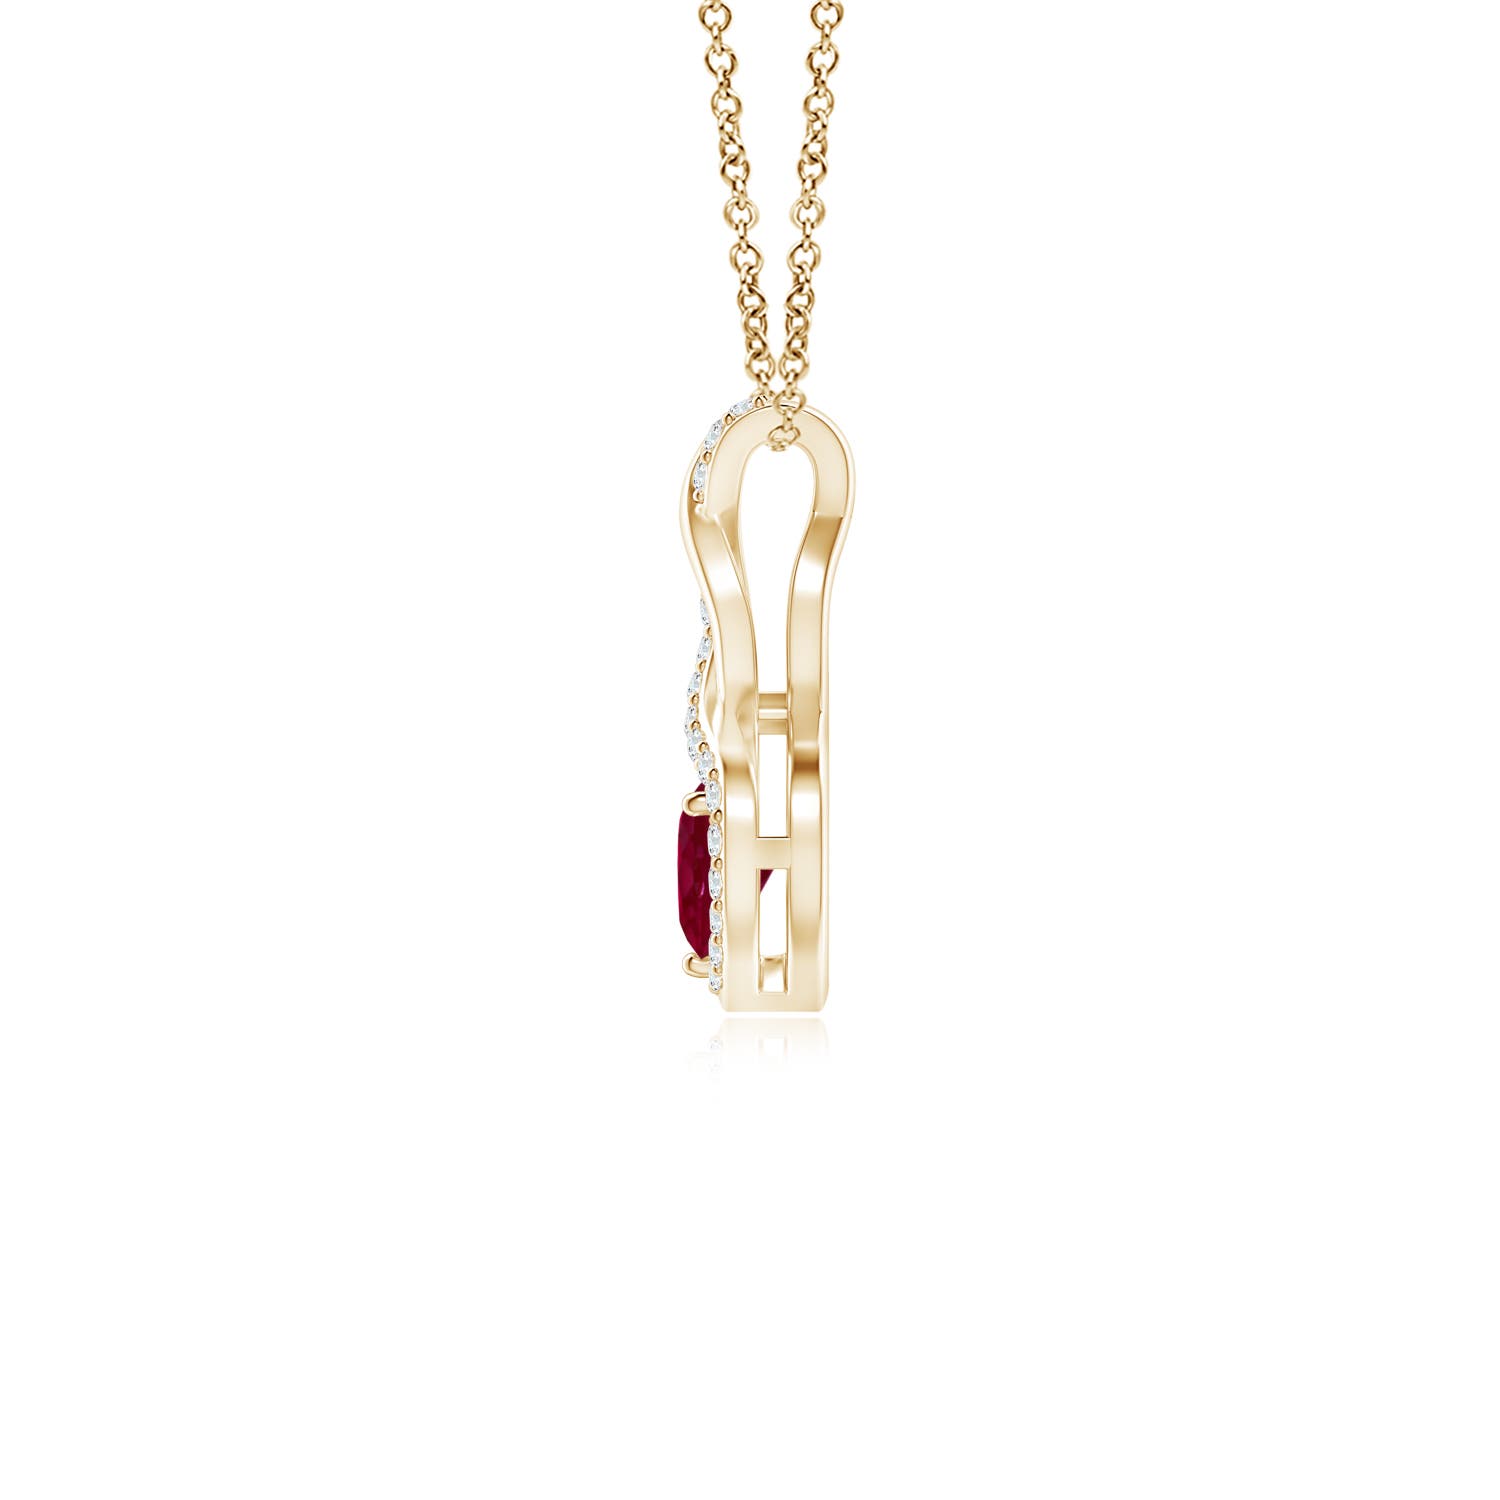 A - Ruby / 0.35 CT / 14 KT Yellow Gold